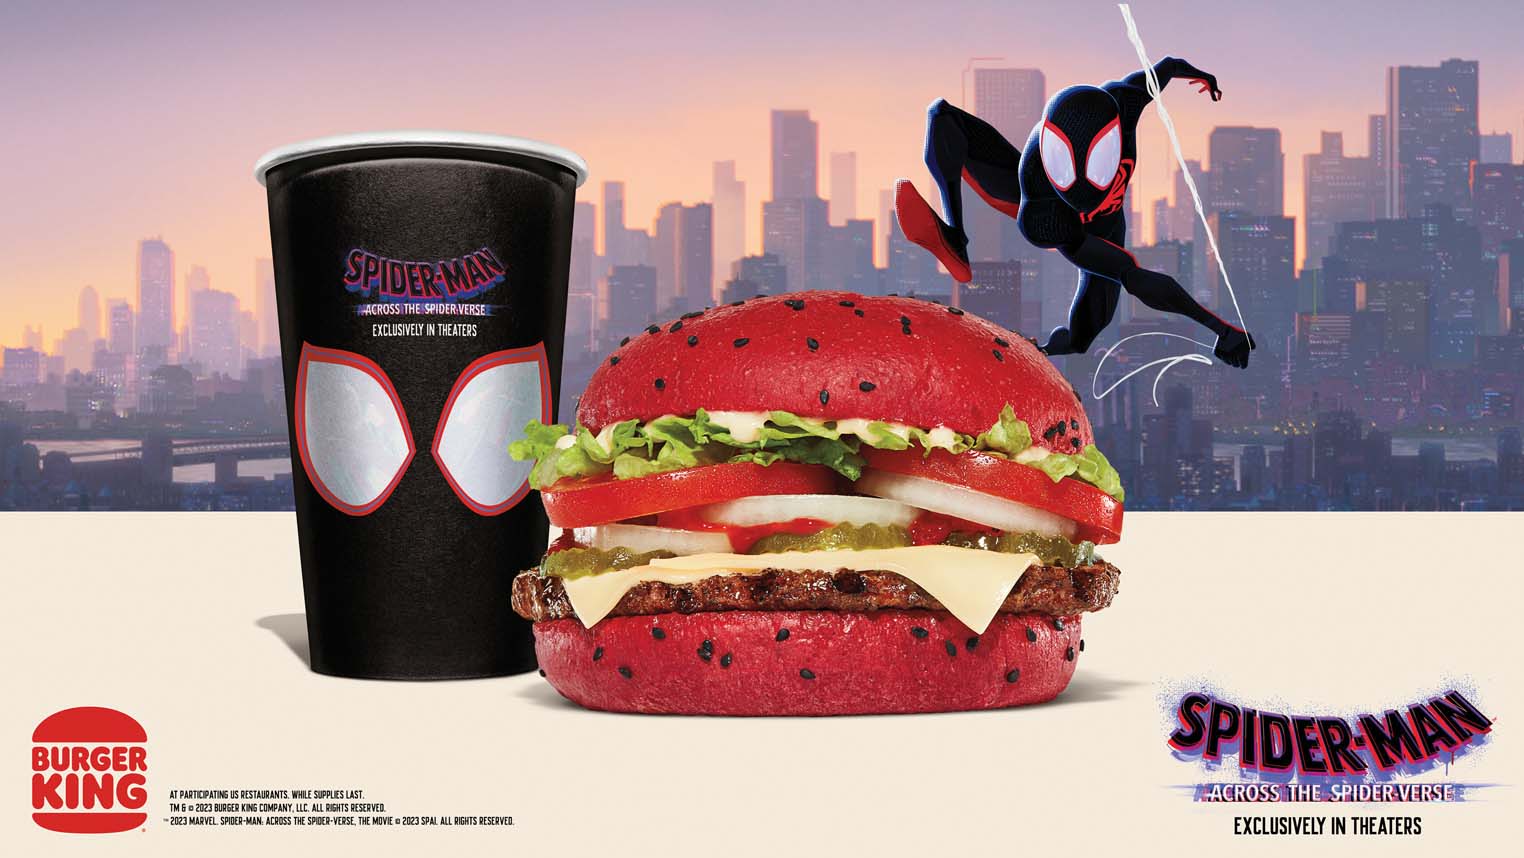 Burger King Conducts Co-Promotion With Spider-Man: Across The Spider-Verse